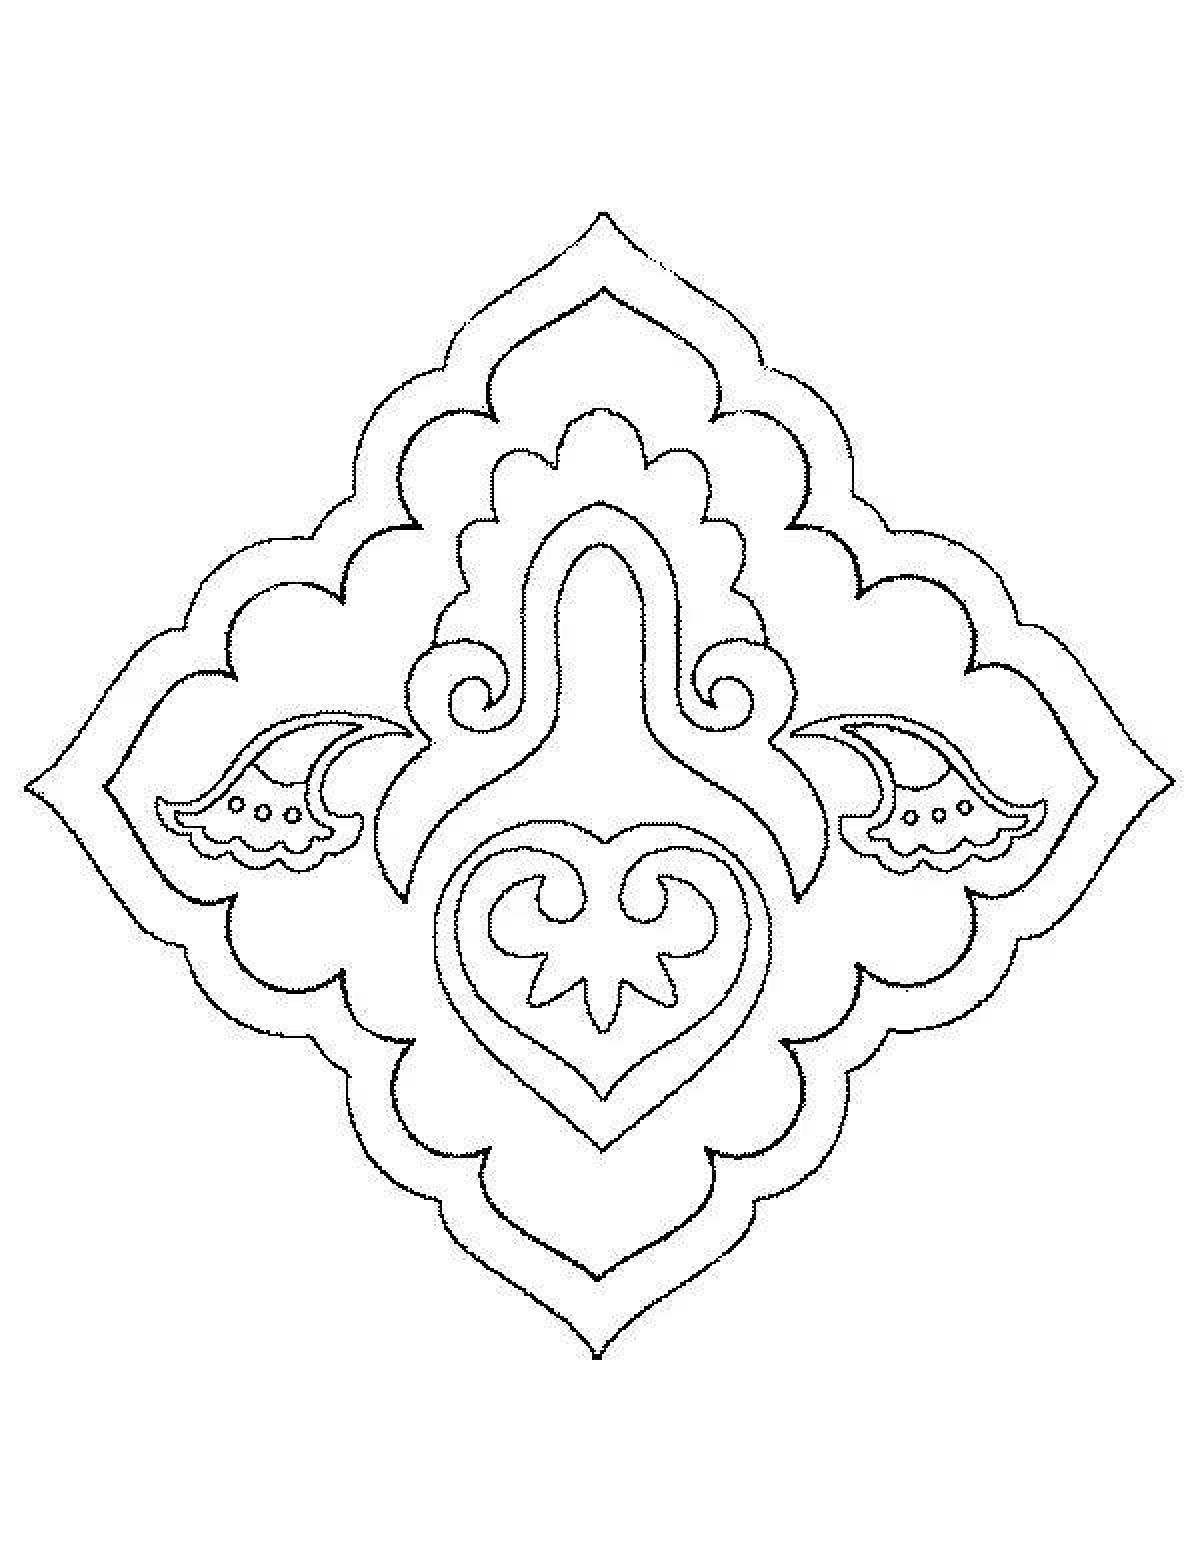 Coloring page artistic Tatar ornament